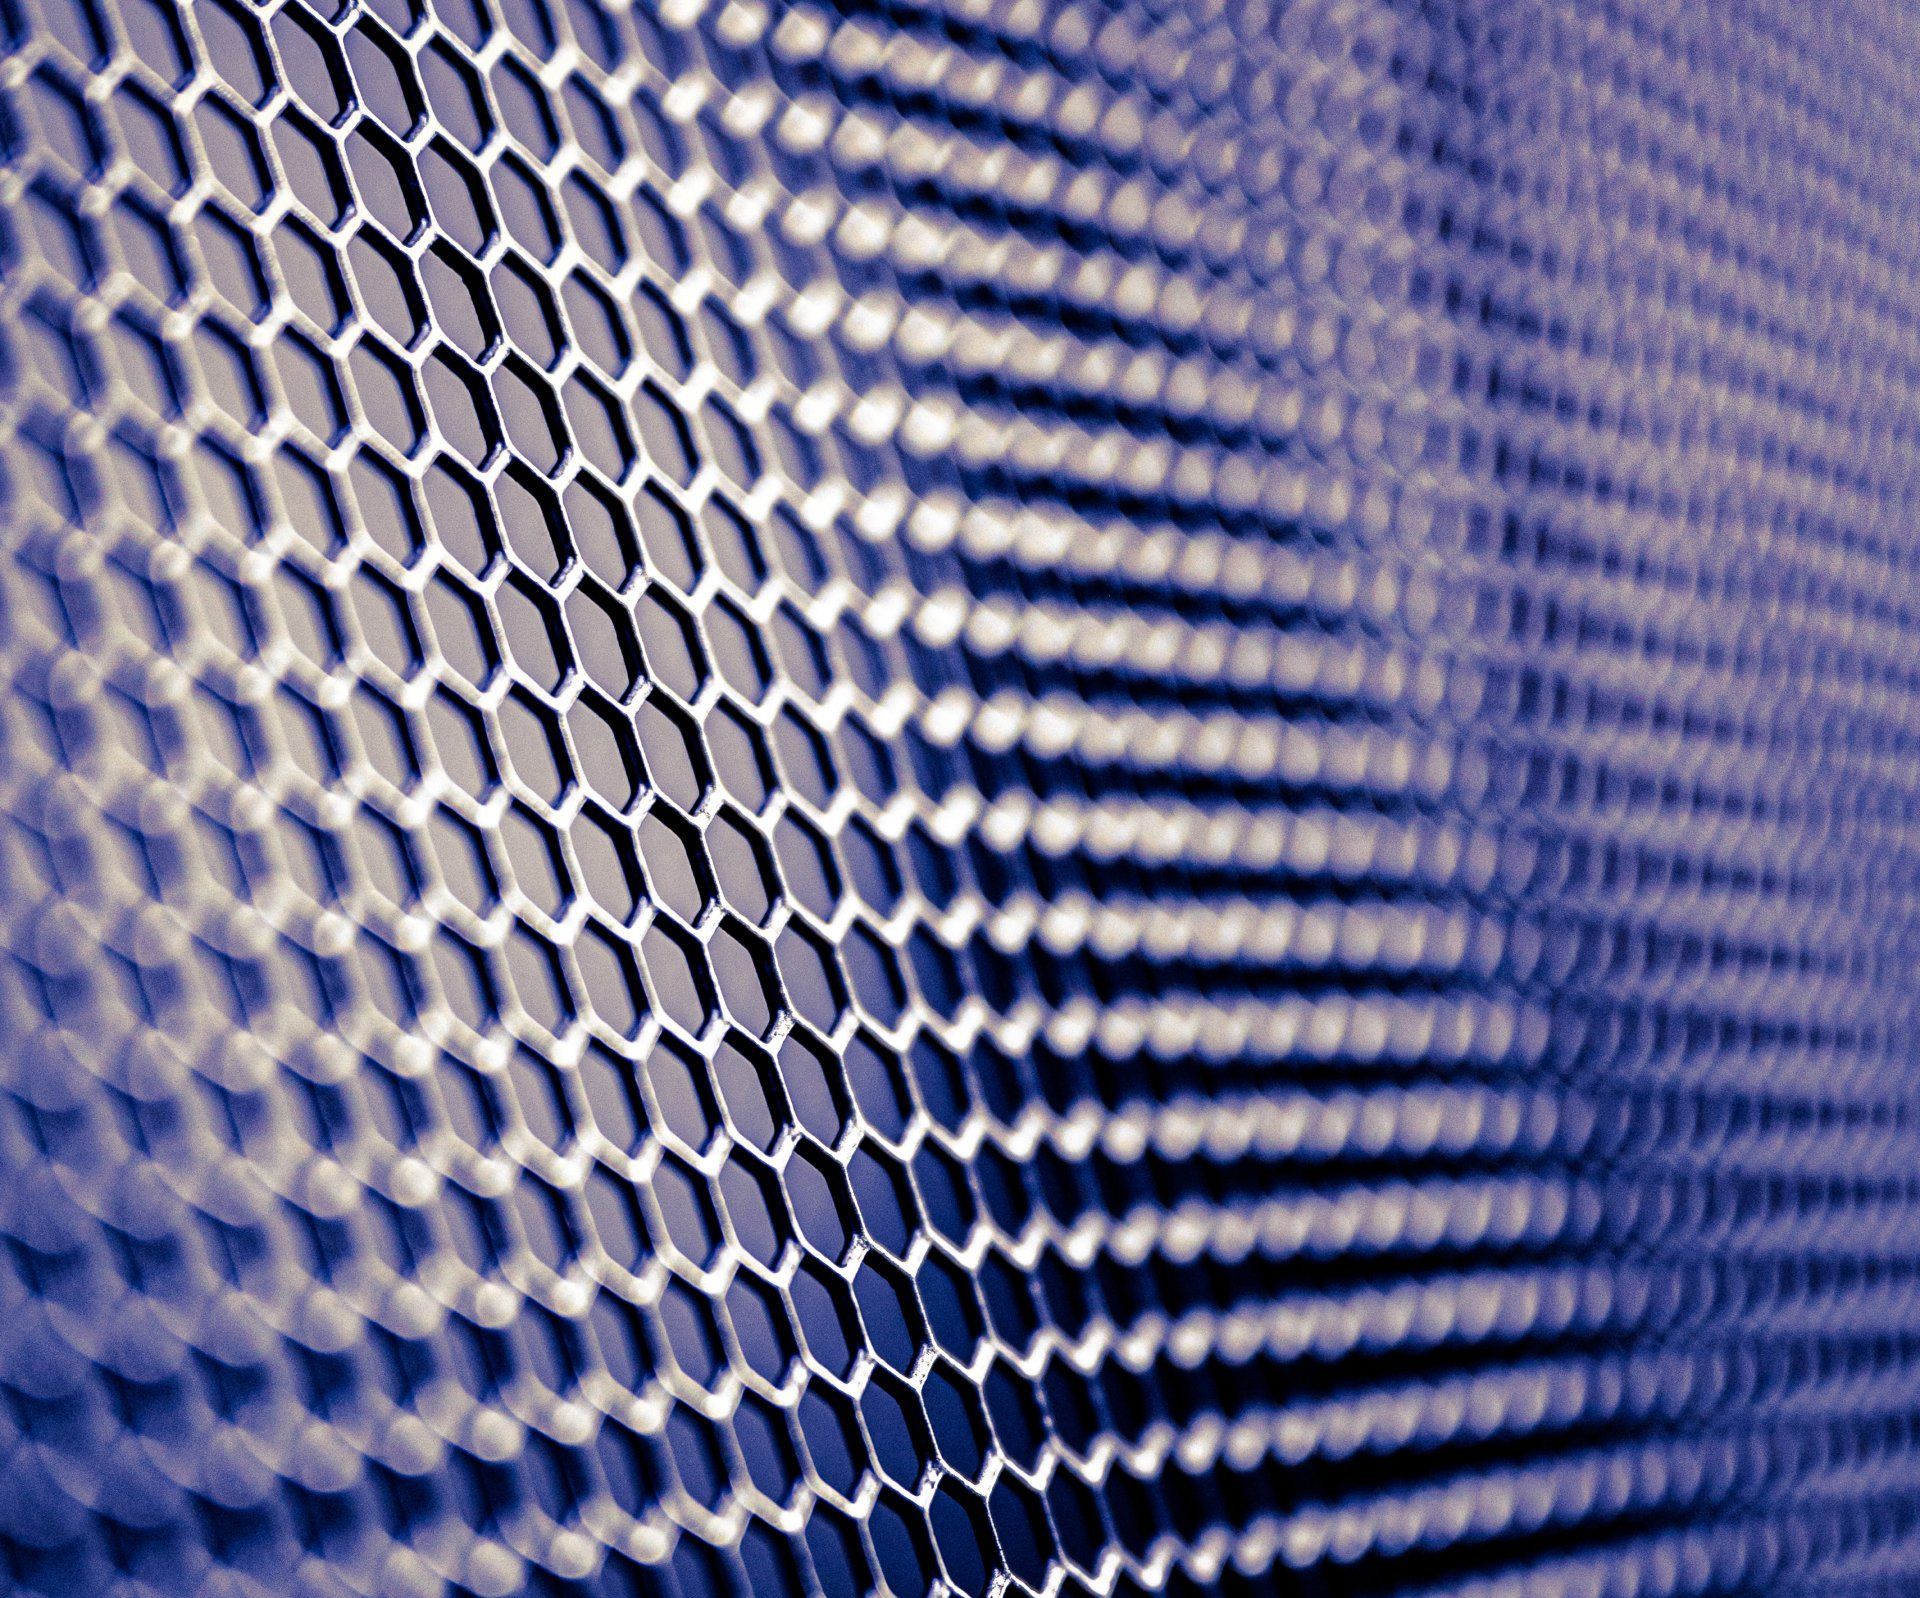 A close up of a metal mesh with a blue background.